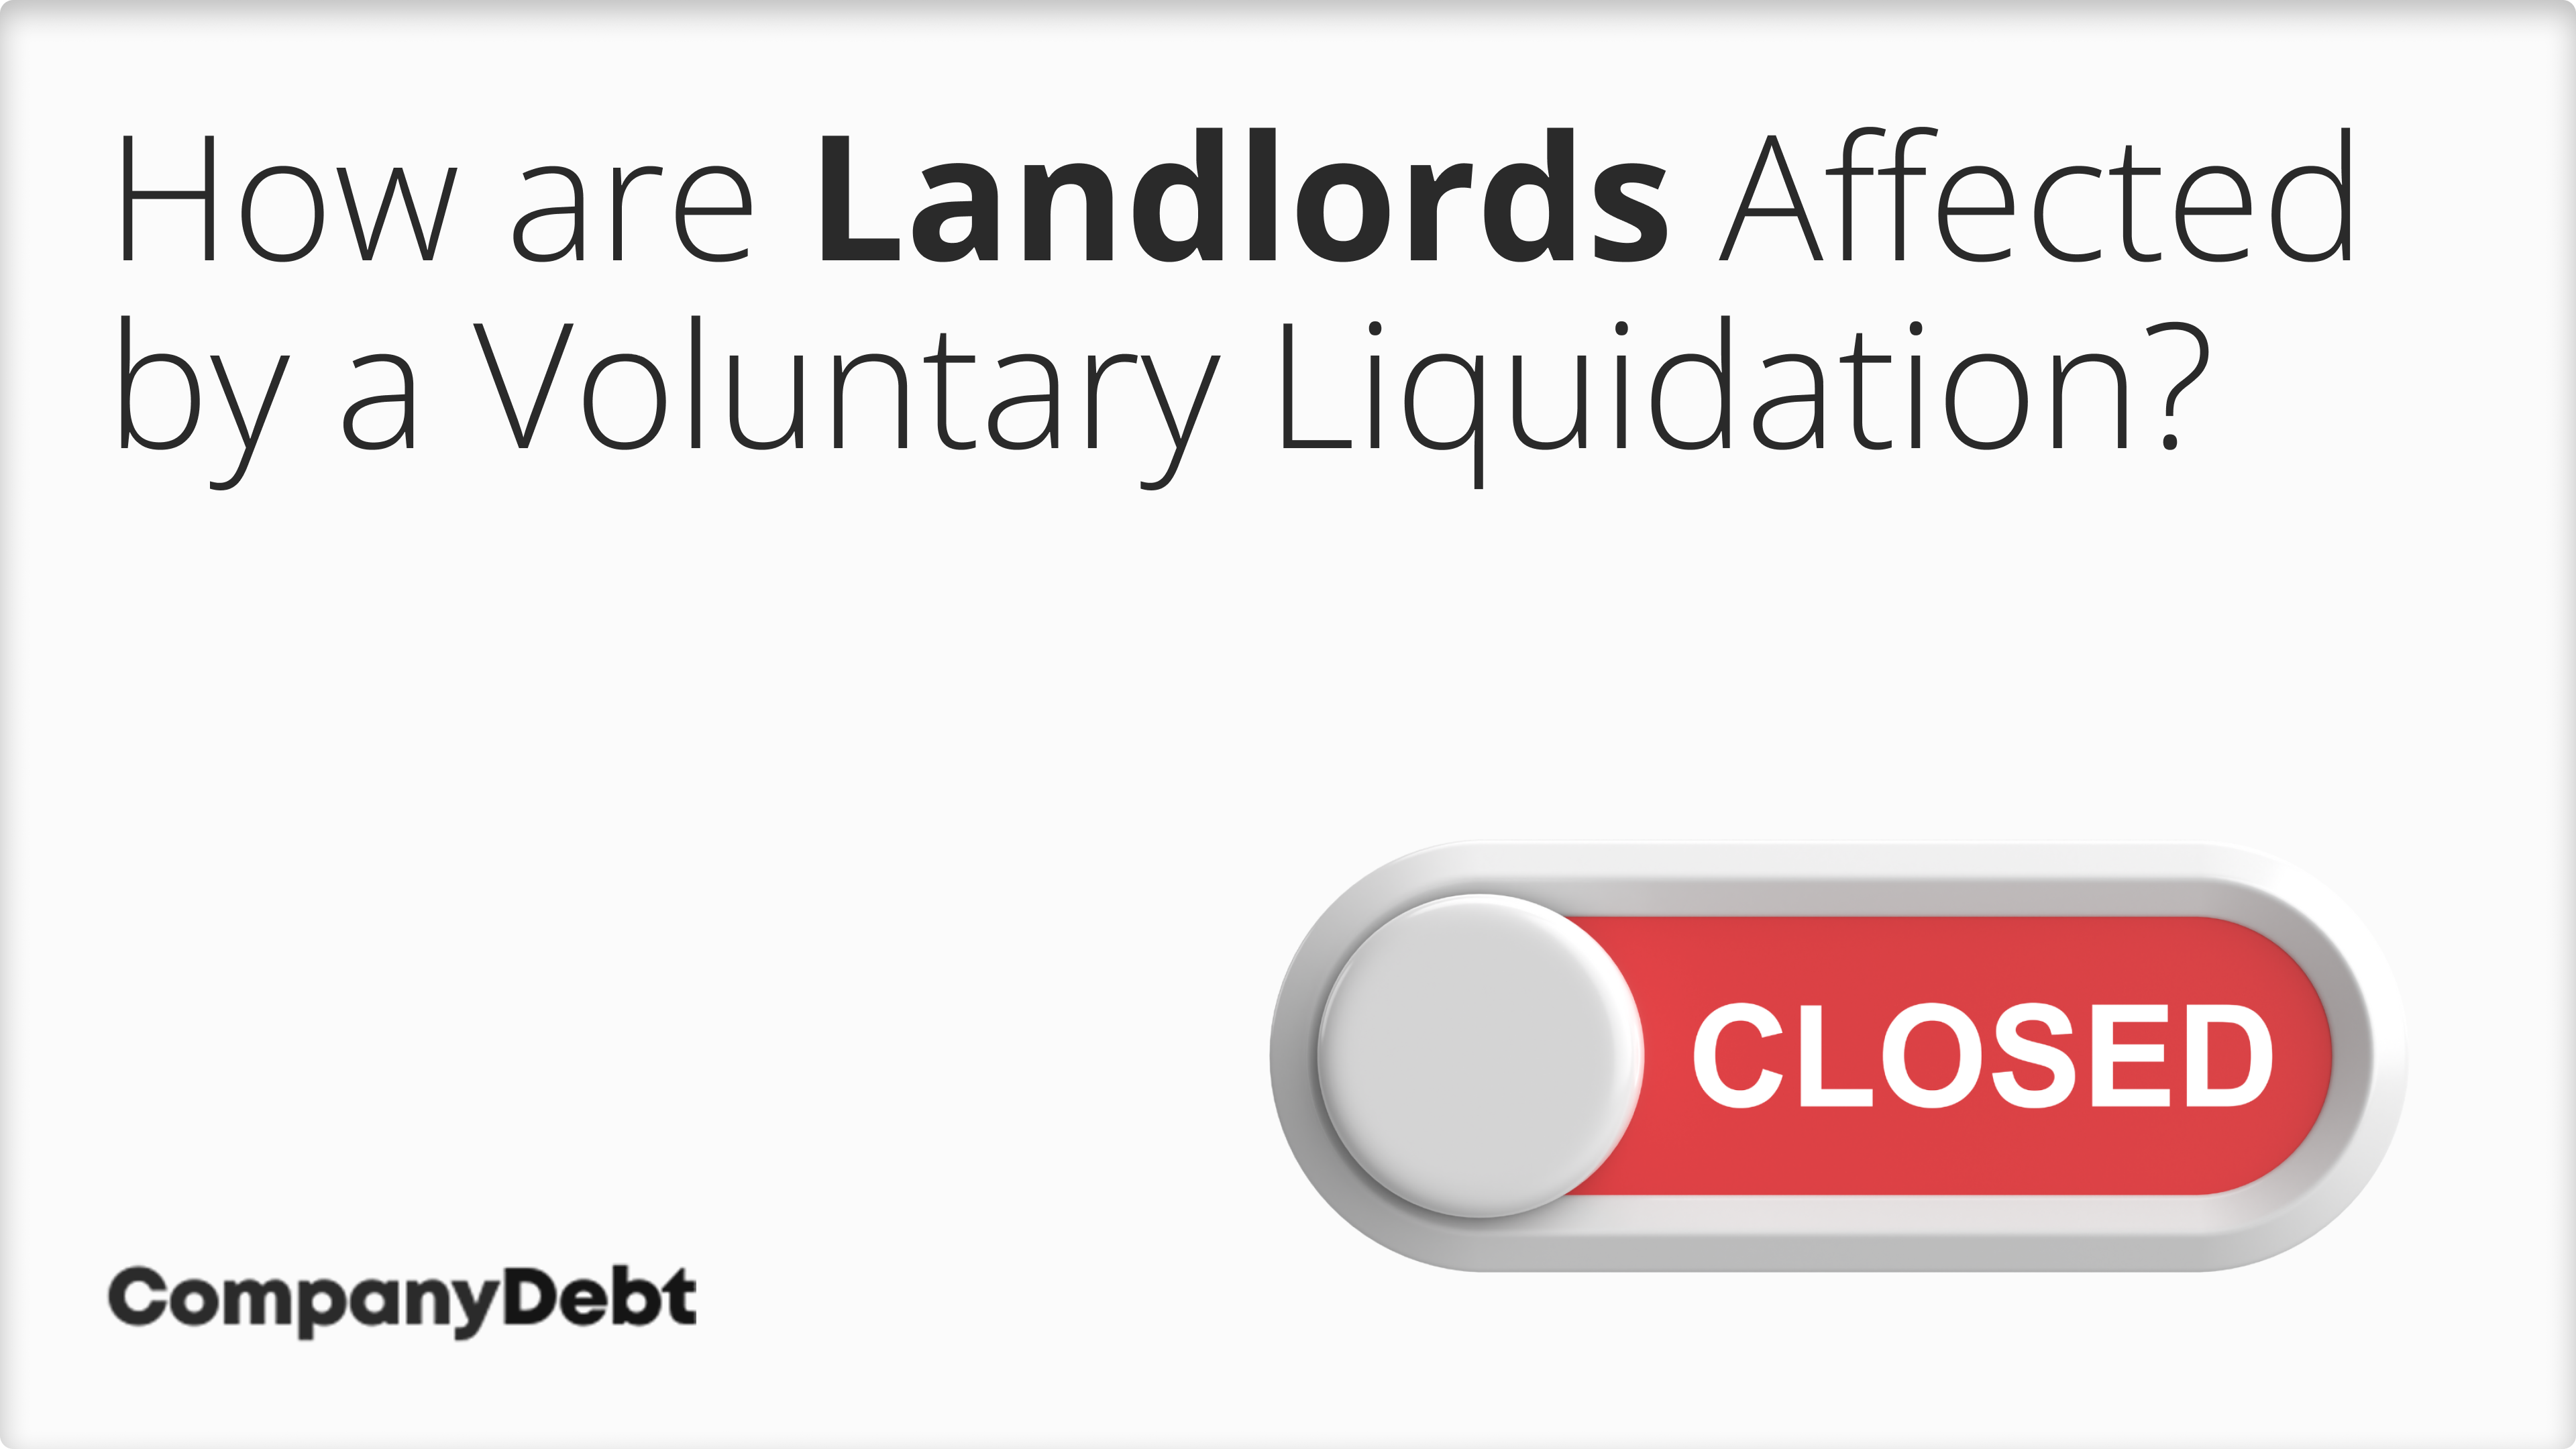 How-are-Landlords-Affected-by-a-Voluntary-Liquidation_